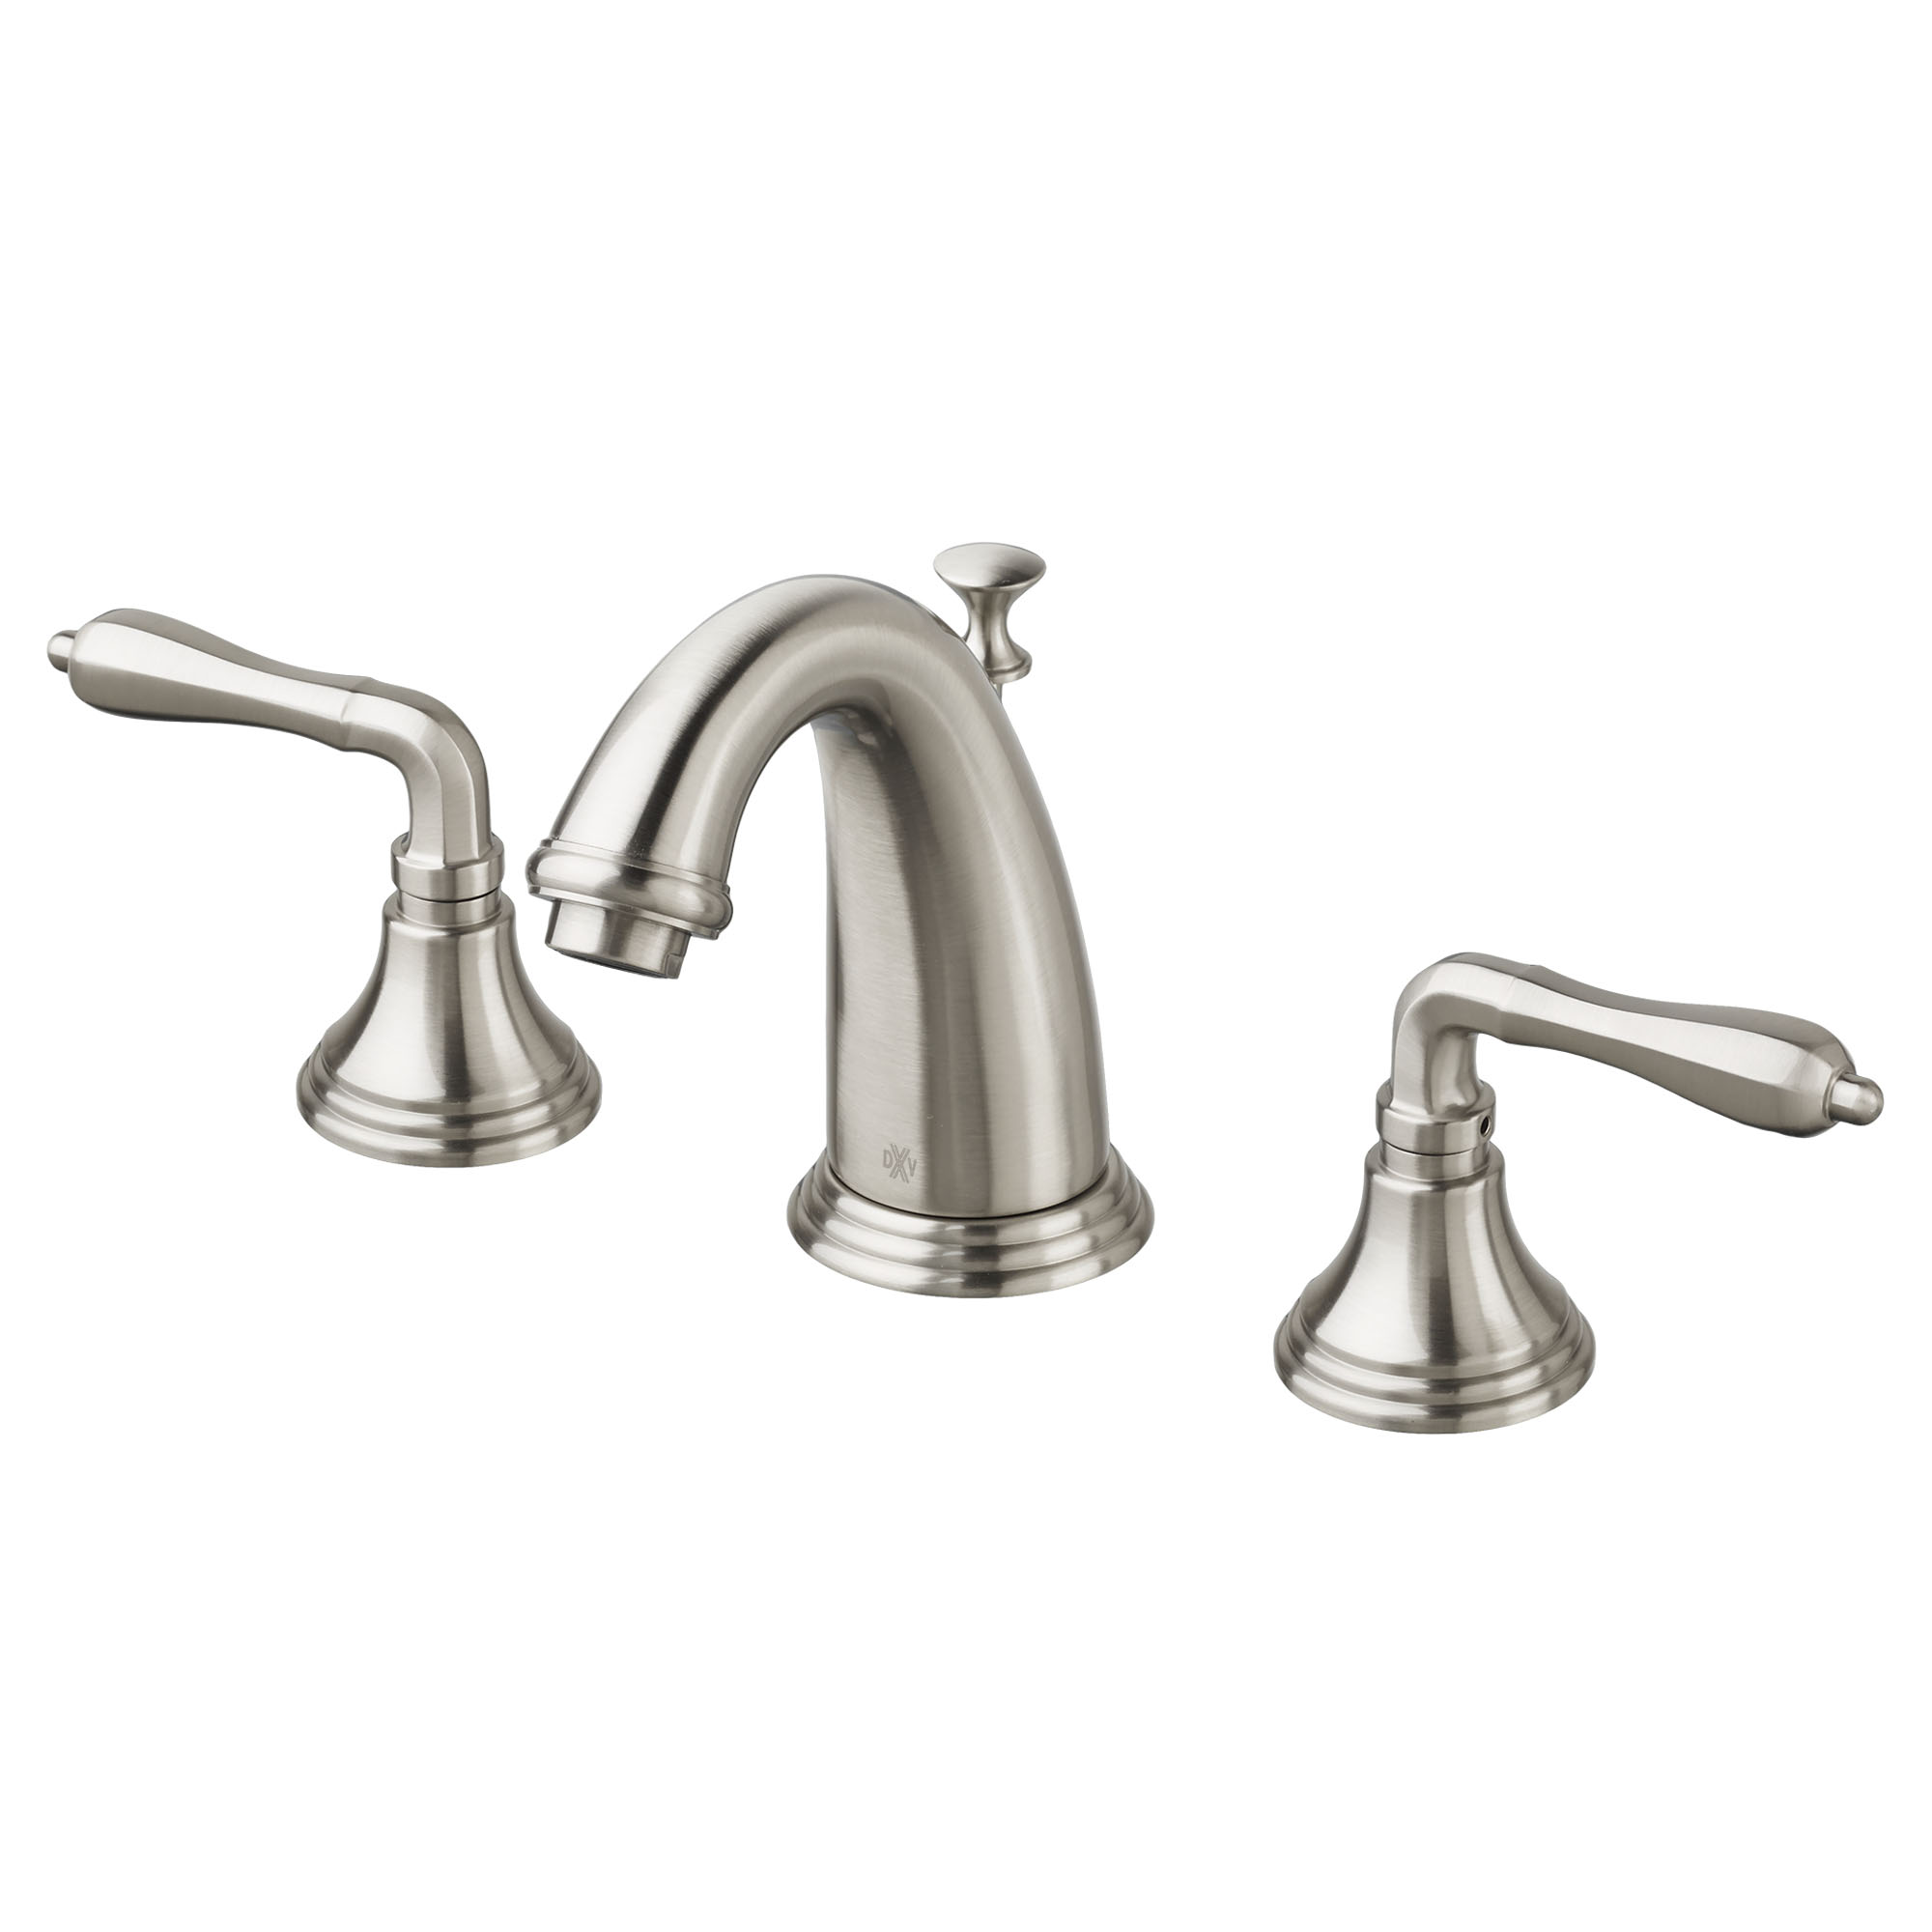 Ashbee 2-Handle Widespread Bathroon Faucet with Lever Handles